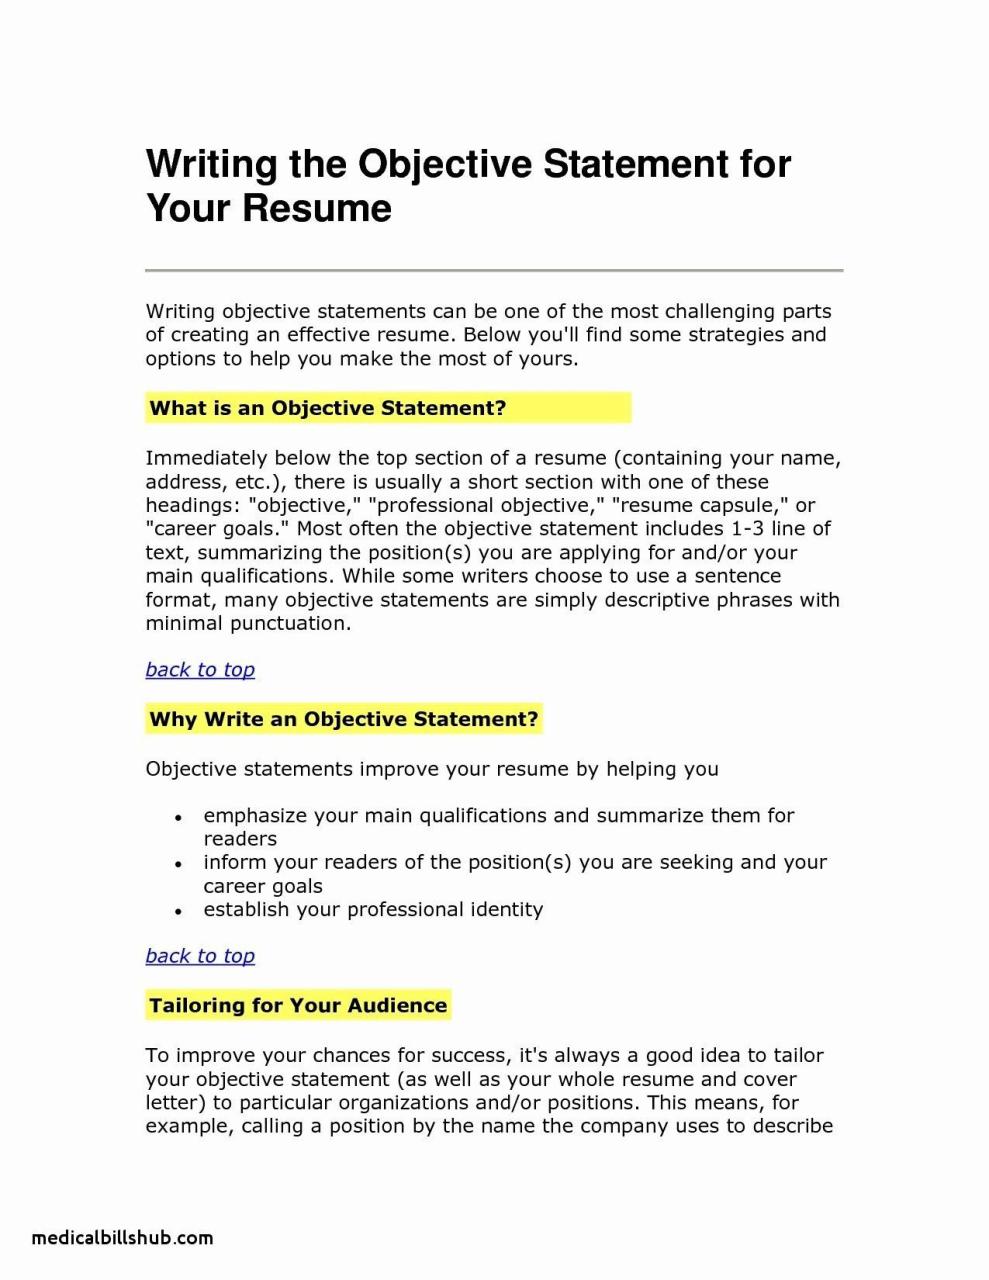 How To Write An Objective Statement On A Resume